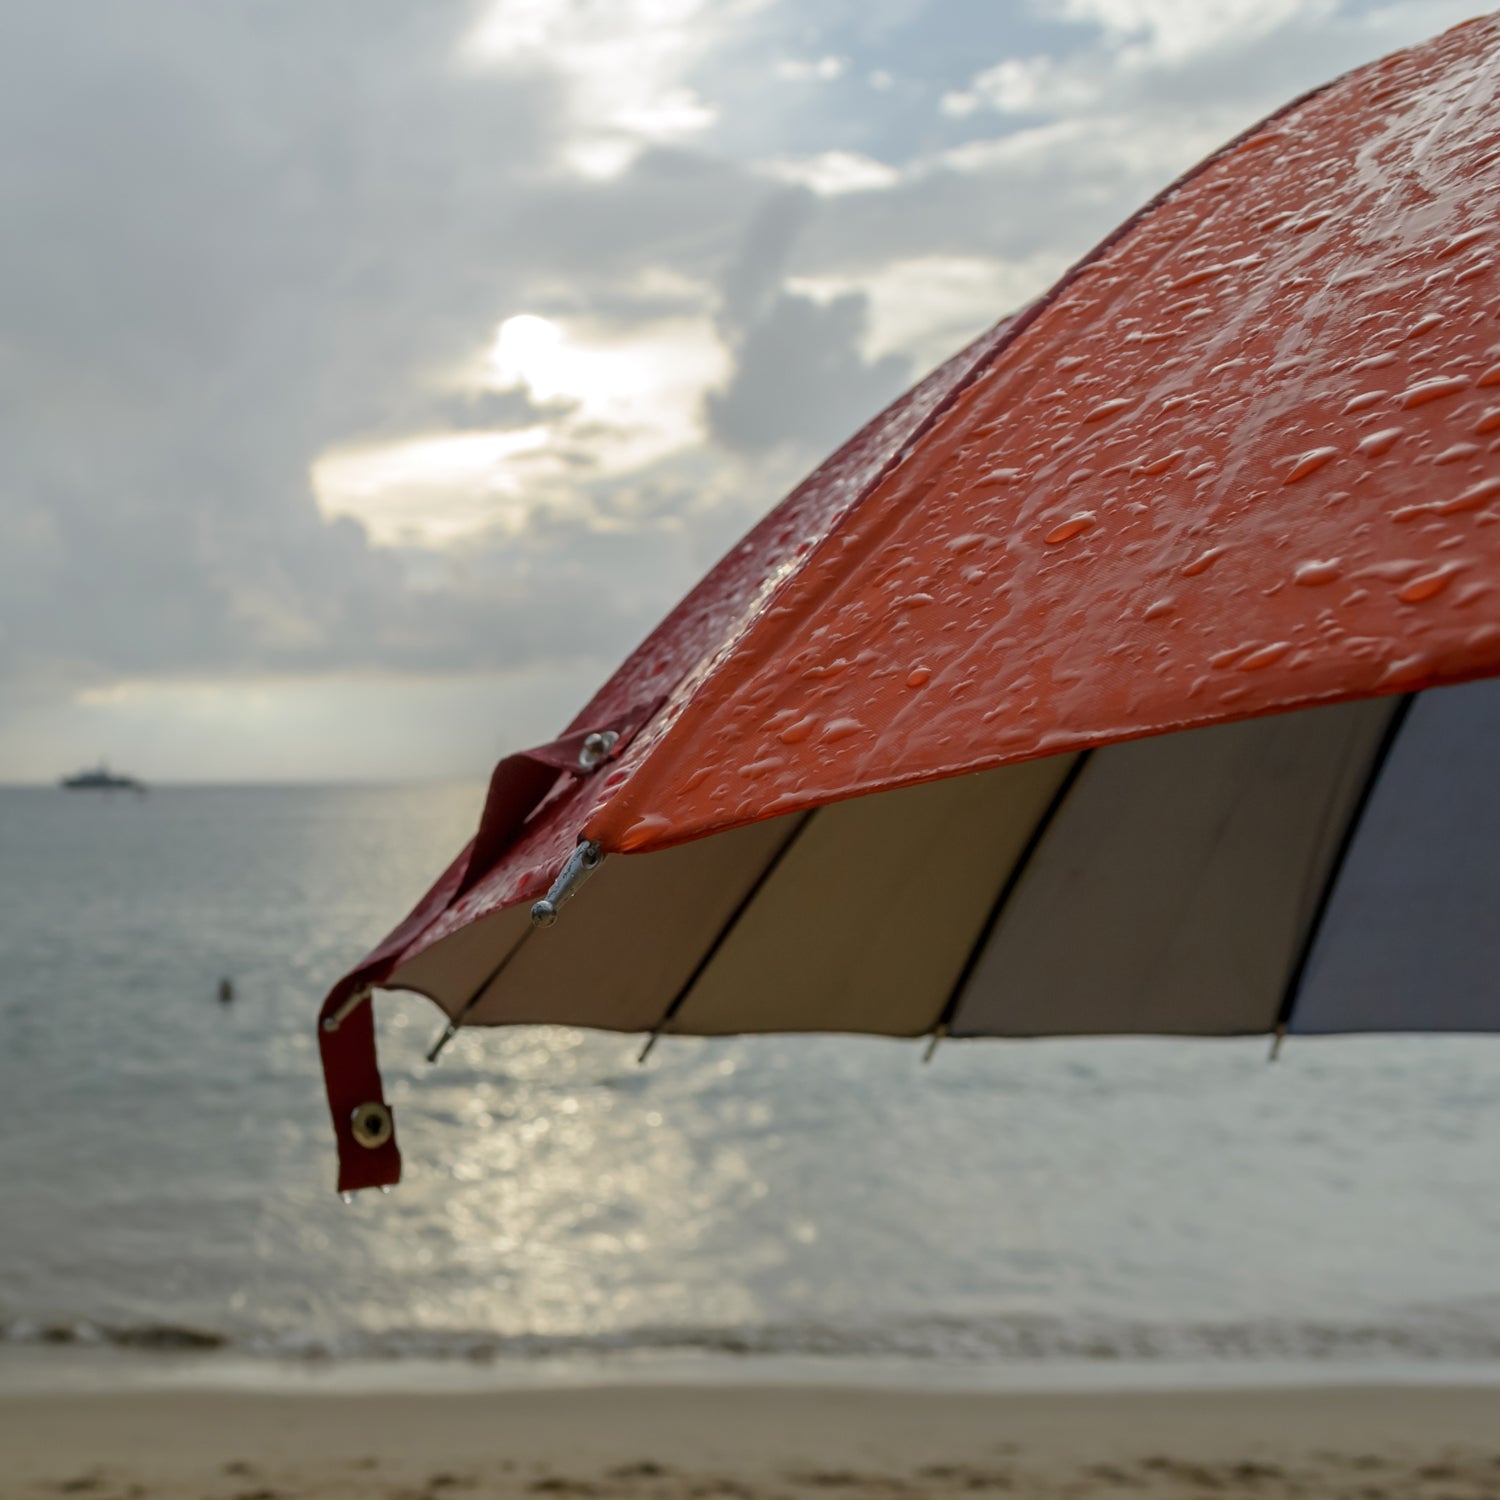 A red and orange Tuscany Candle® EVD umbrella on a beach, providing shade and protection from the sun while trying to catch the soothing scent of Sea & Sand Long-Lasting Scented Jar Candles (18 oz) wafting through the breeze.